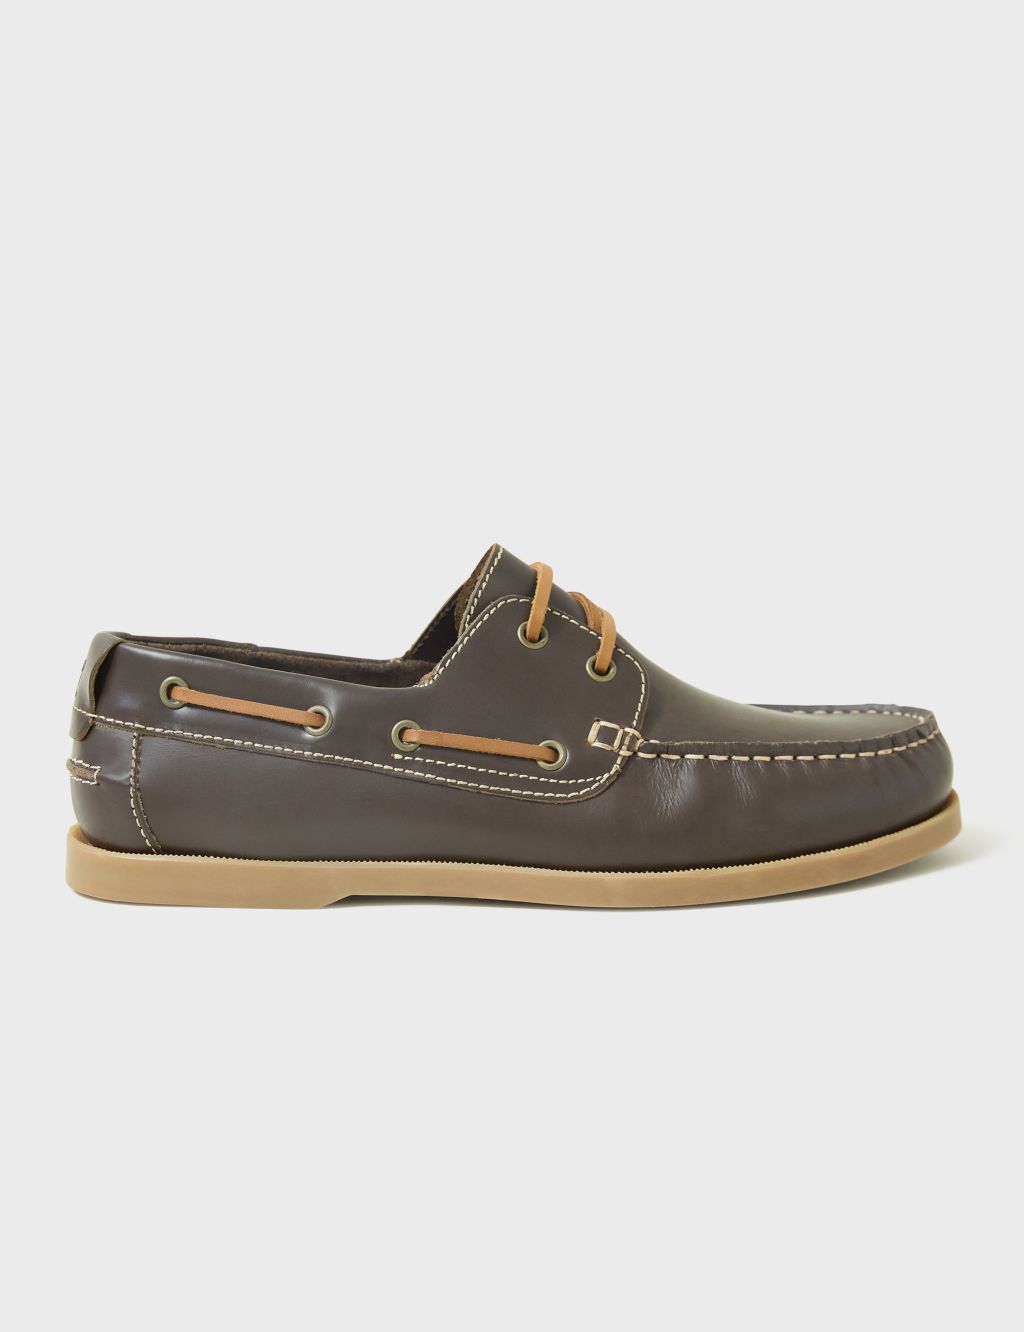 Buy Leather Boat Shoes | Crew Clothing | M&S